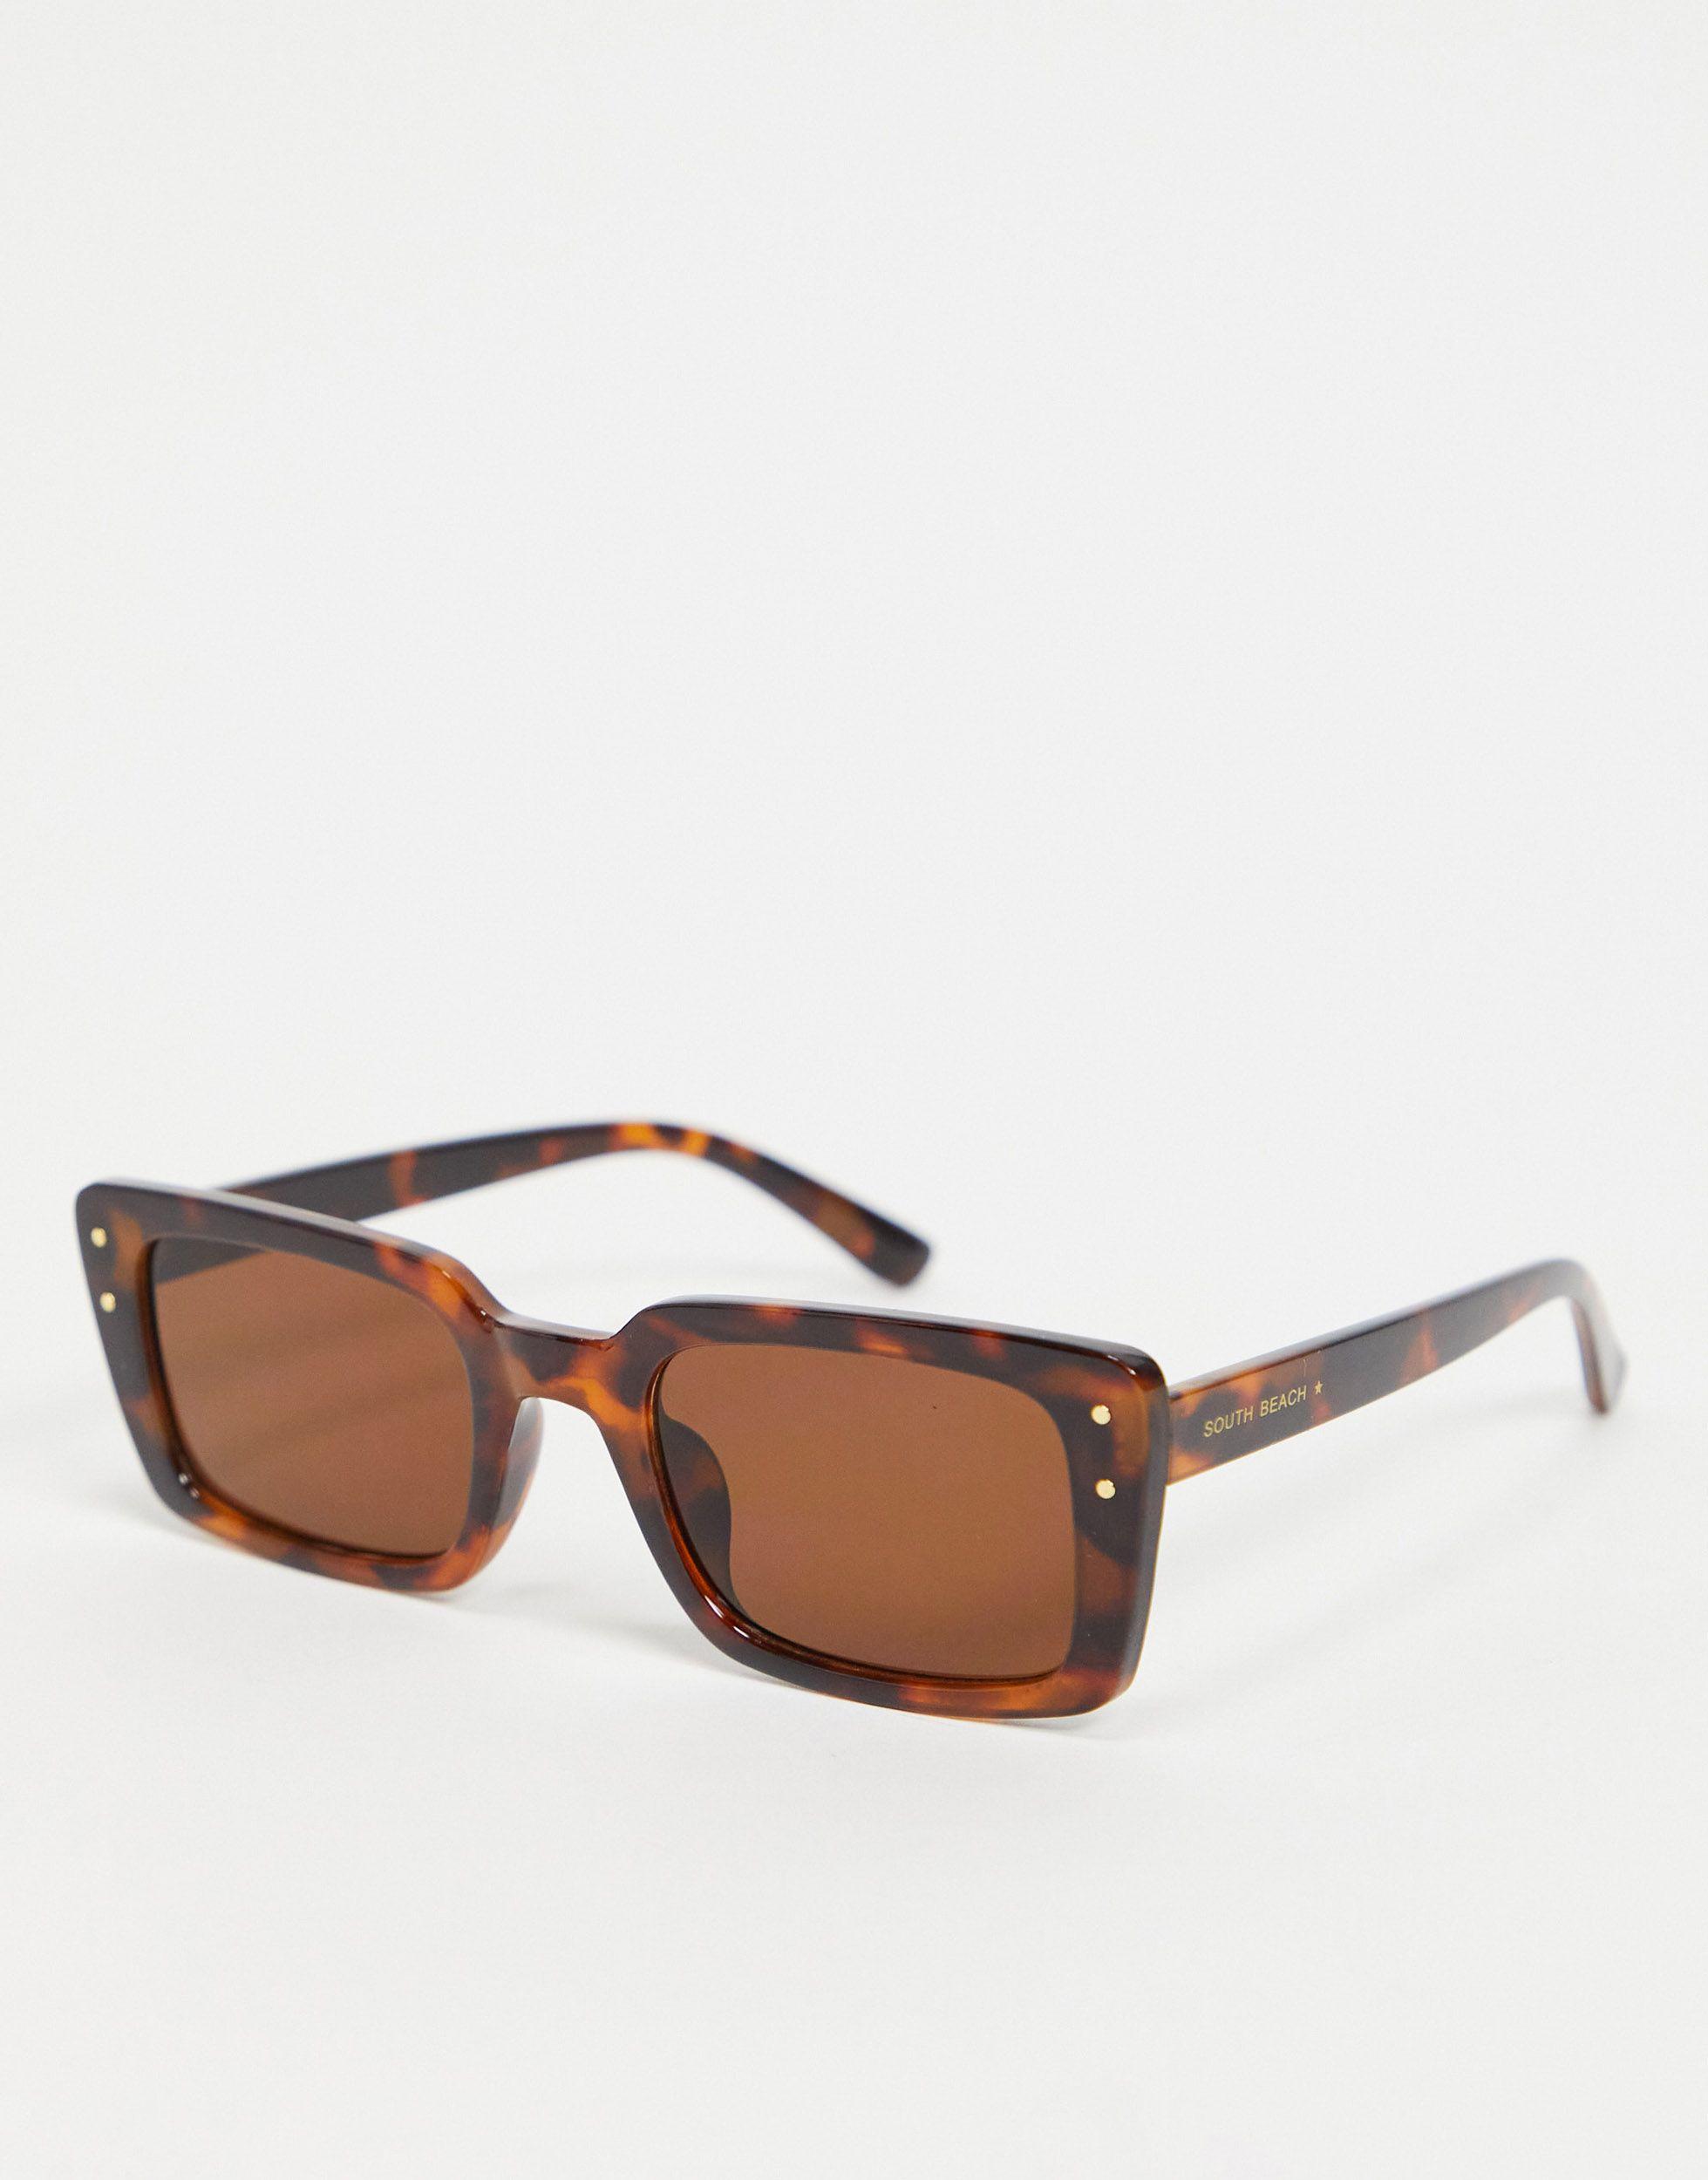 South Beach Rectangle Frame Sunglasses in Brown | Lyst